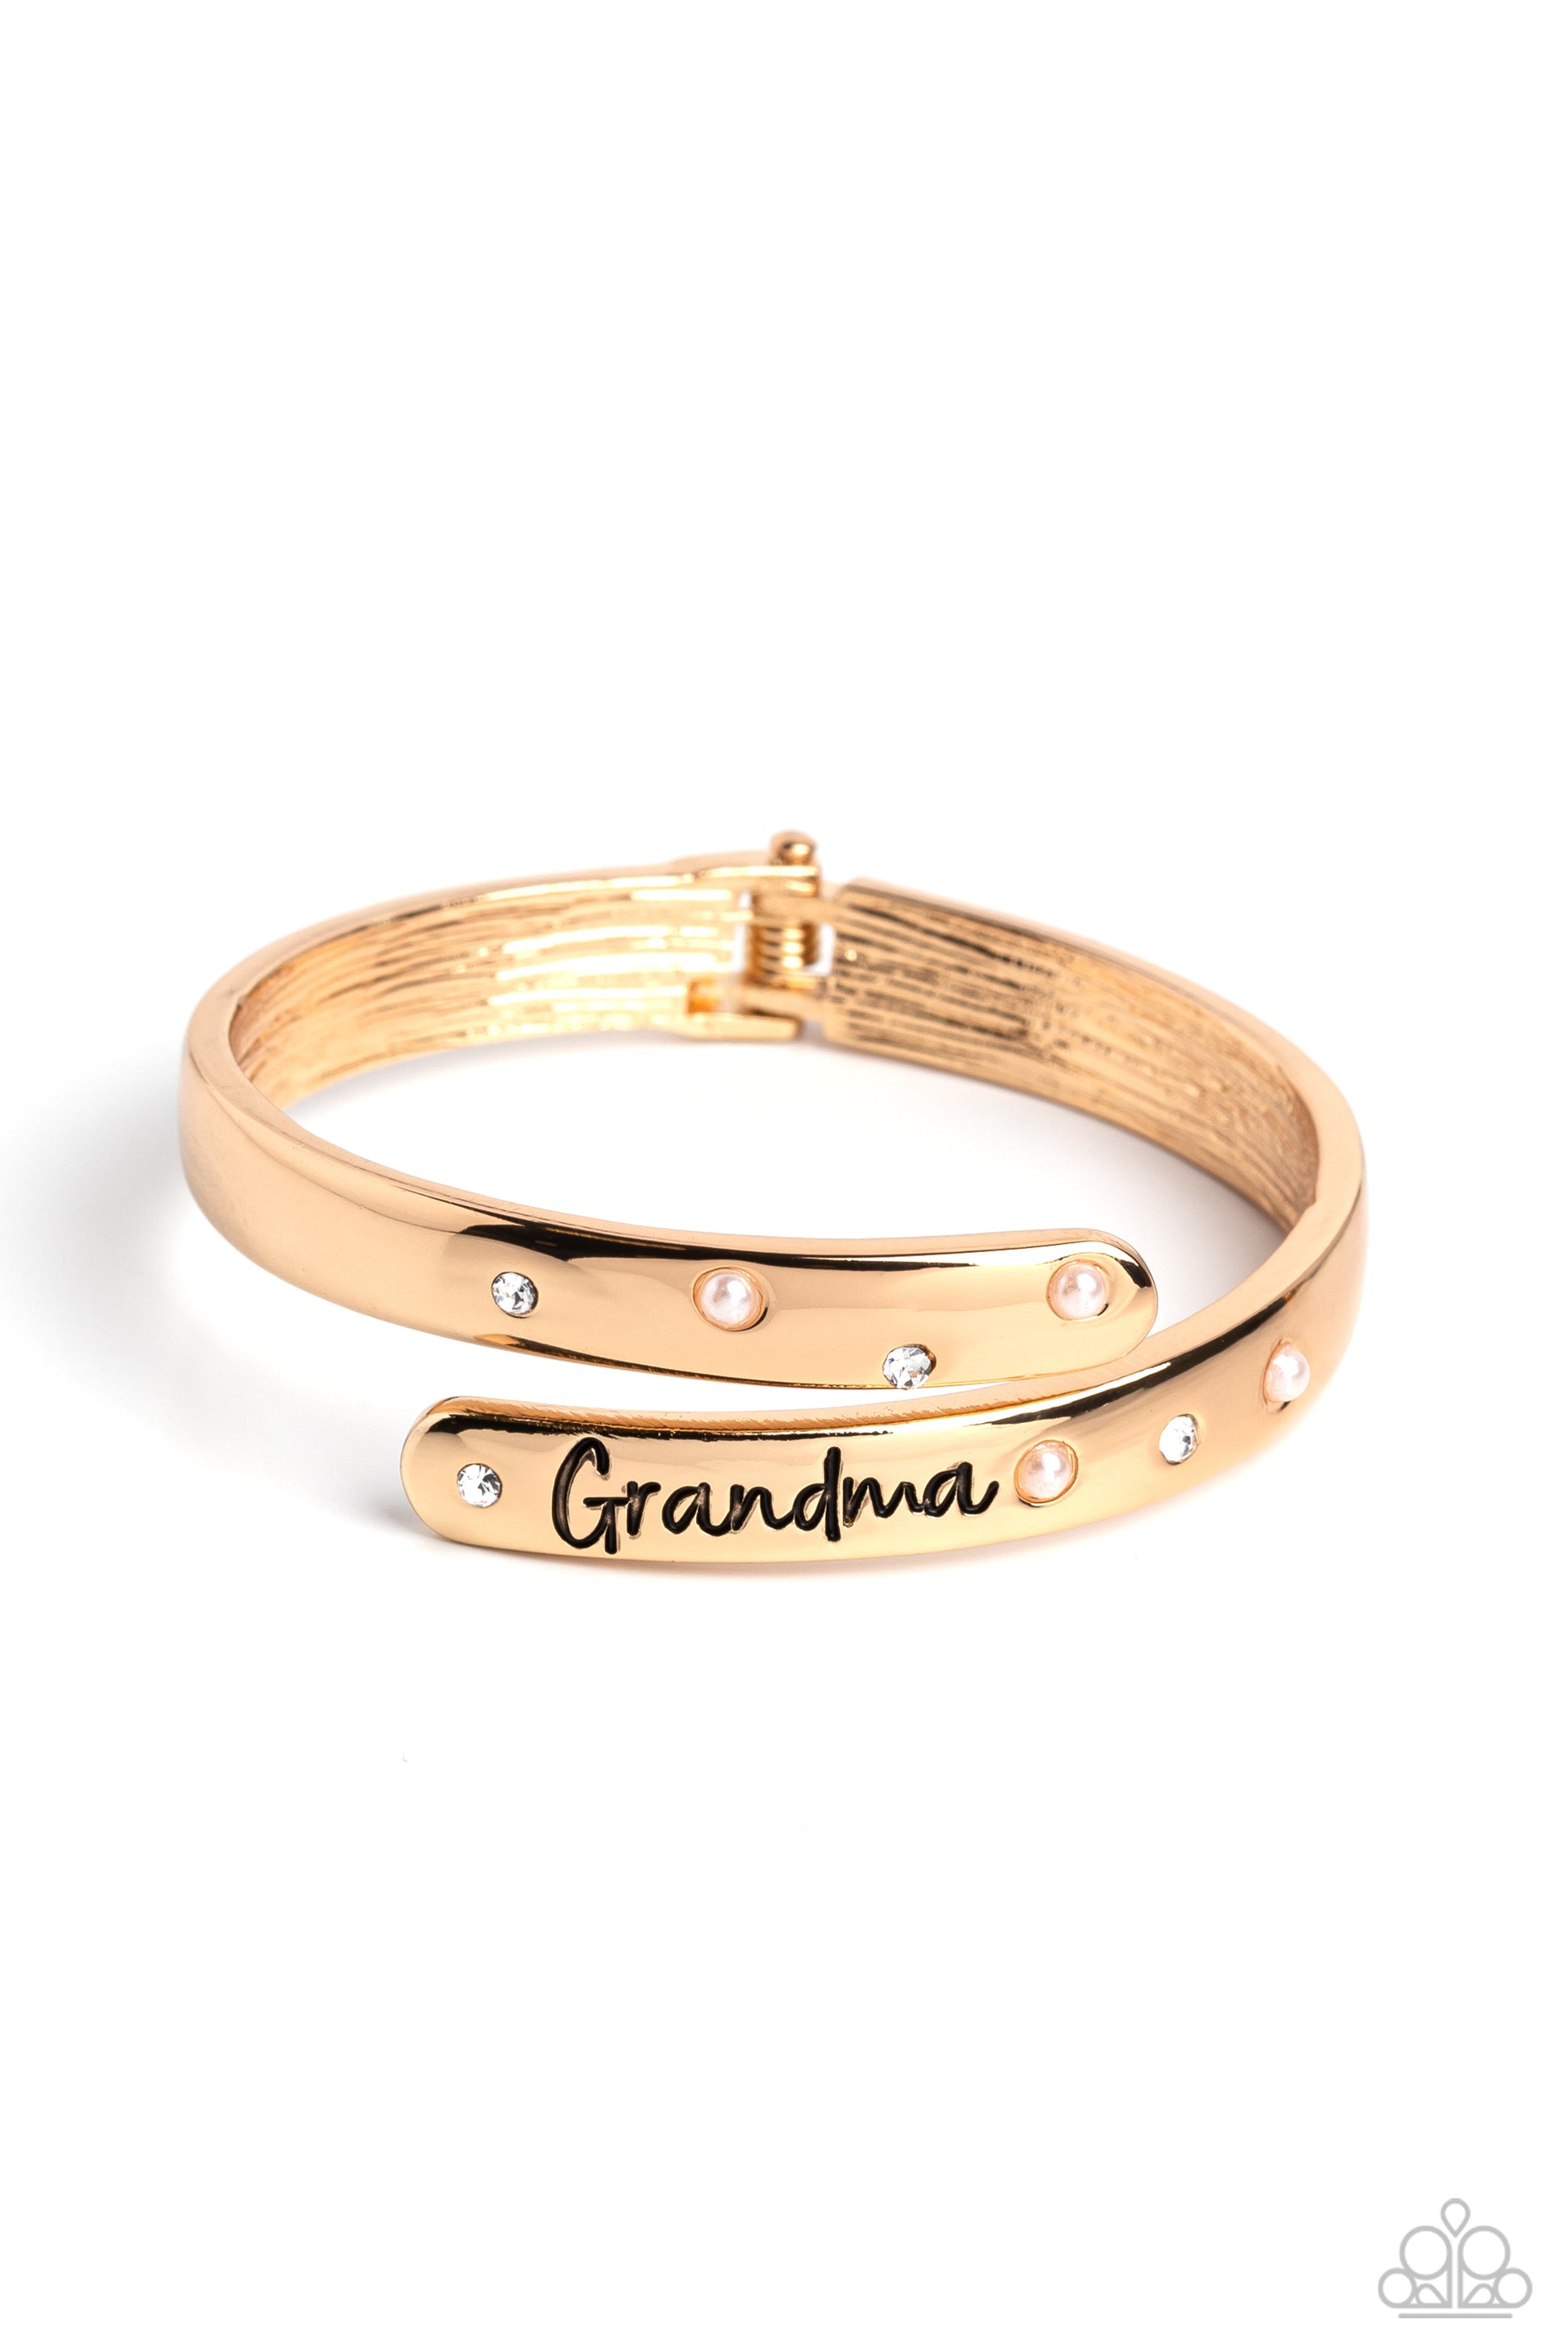 Gorgeous Grandma Gold Hinge Bracelet - Paparazzi Accessories  High-sheen gold curves into a hinged closure around the wrist. Featured on the upper curve, dainty pearls and white rhinestones alternate in a zig-zag pattern for a refined shimmer. The lower curve of gold features the stamped word "Grandma" in a curly font with rhinestones and pearls bordering the word for additional elegance. Features a hinged closure.  Sold as one individual bracelet.  P9WD-GDXX-191XX